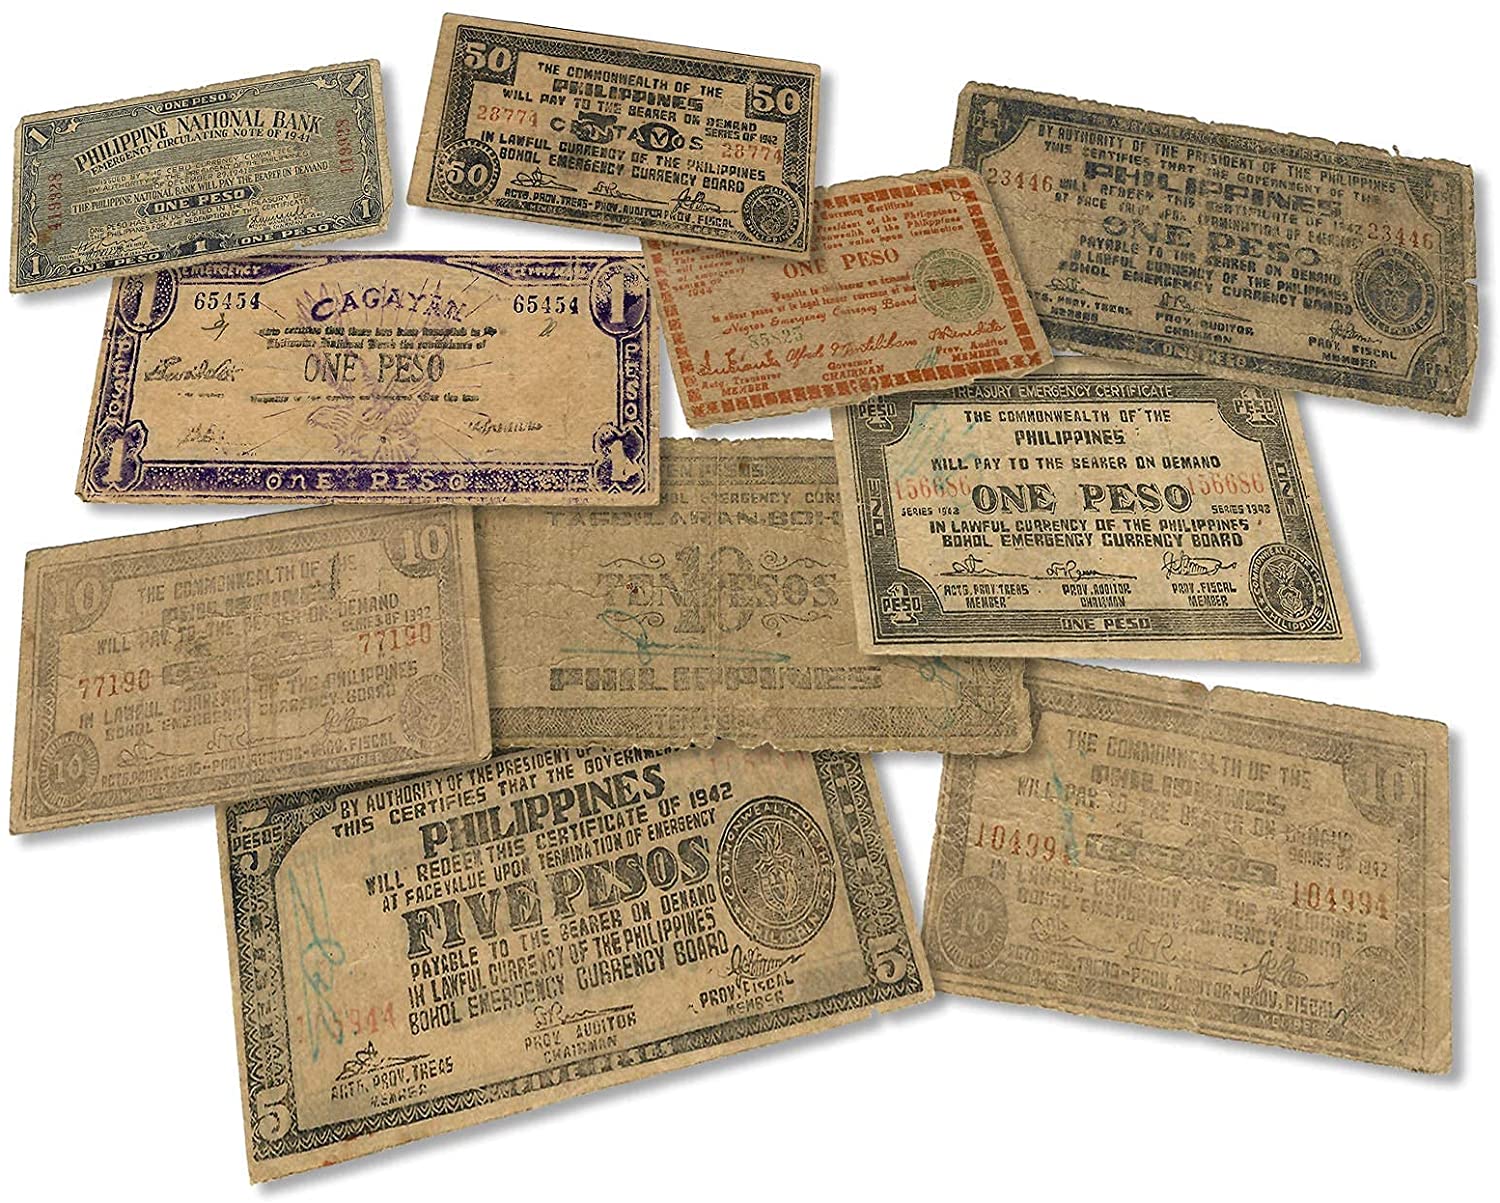 WW2 World Currency - 10 Banknotes Used During The World War 2 by The Guerrilla (Philippines 1941-1945) - The Death Sentence Money, Certificate of Authenticity